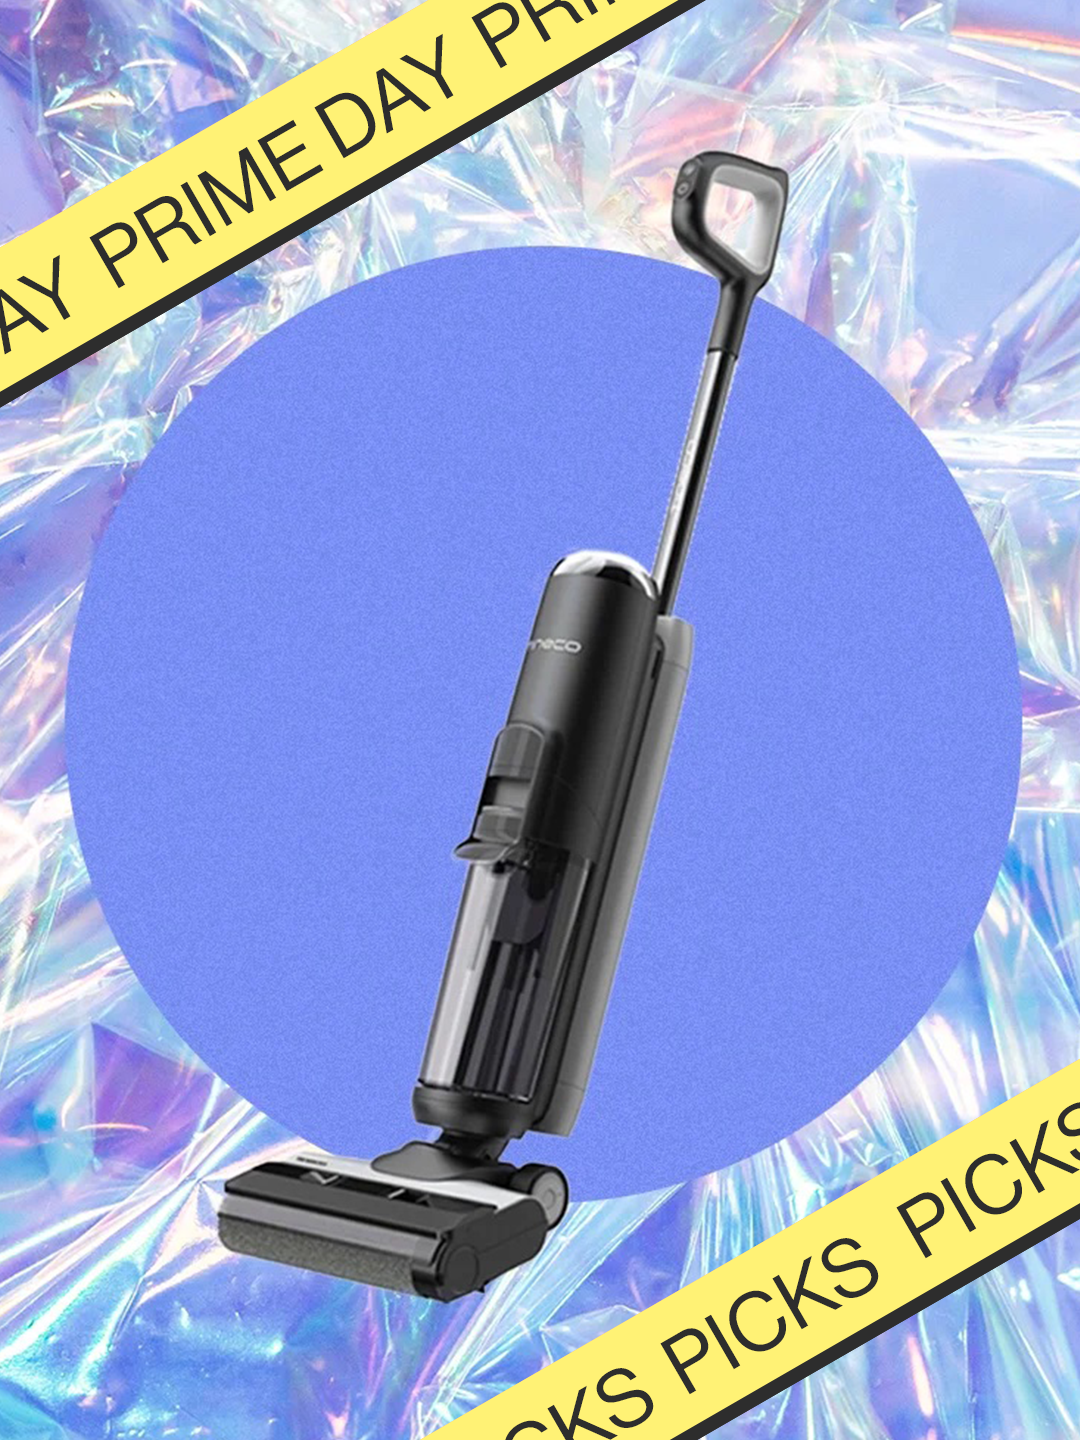 tineco wet/dry vacuum with prime day banner